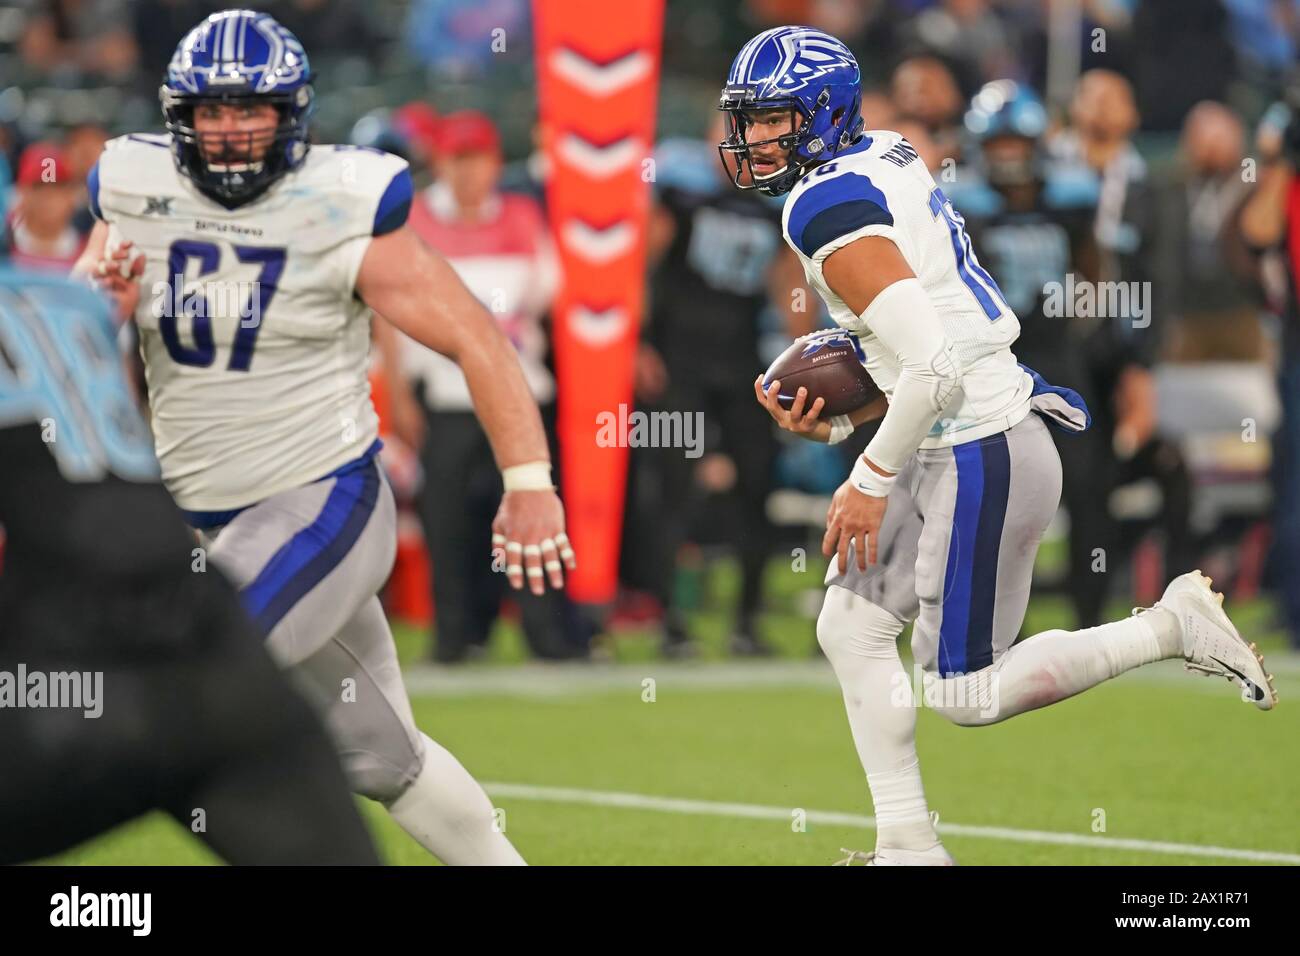 Feb 23, 2020: St. Louis Battlehawks quarterback Jordan Ta'Amu (10) gets  ready to throw a pass during pregame of the game where the NY Guardians  visited the St. Louis Battlehawks. Held at